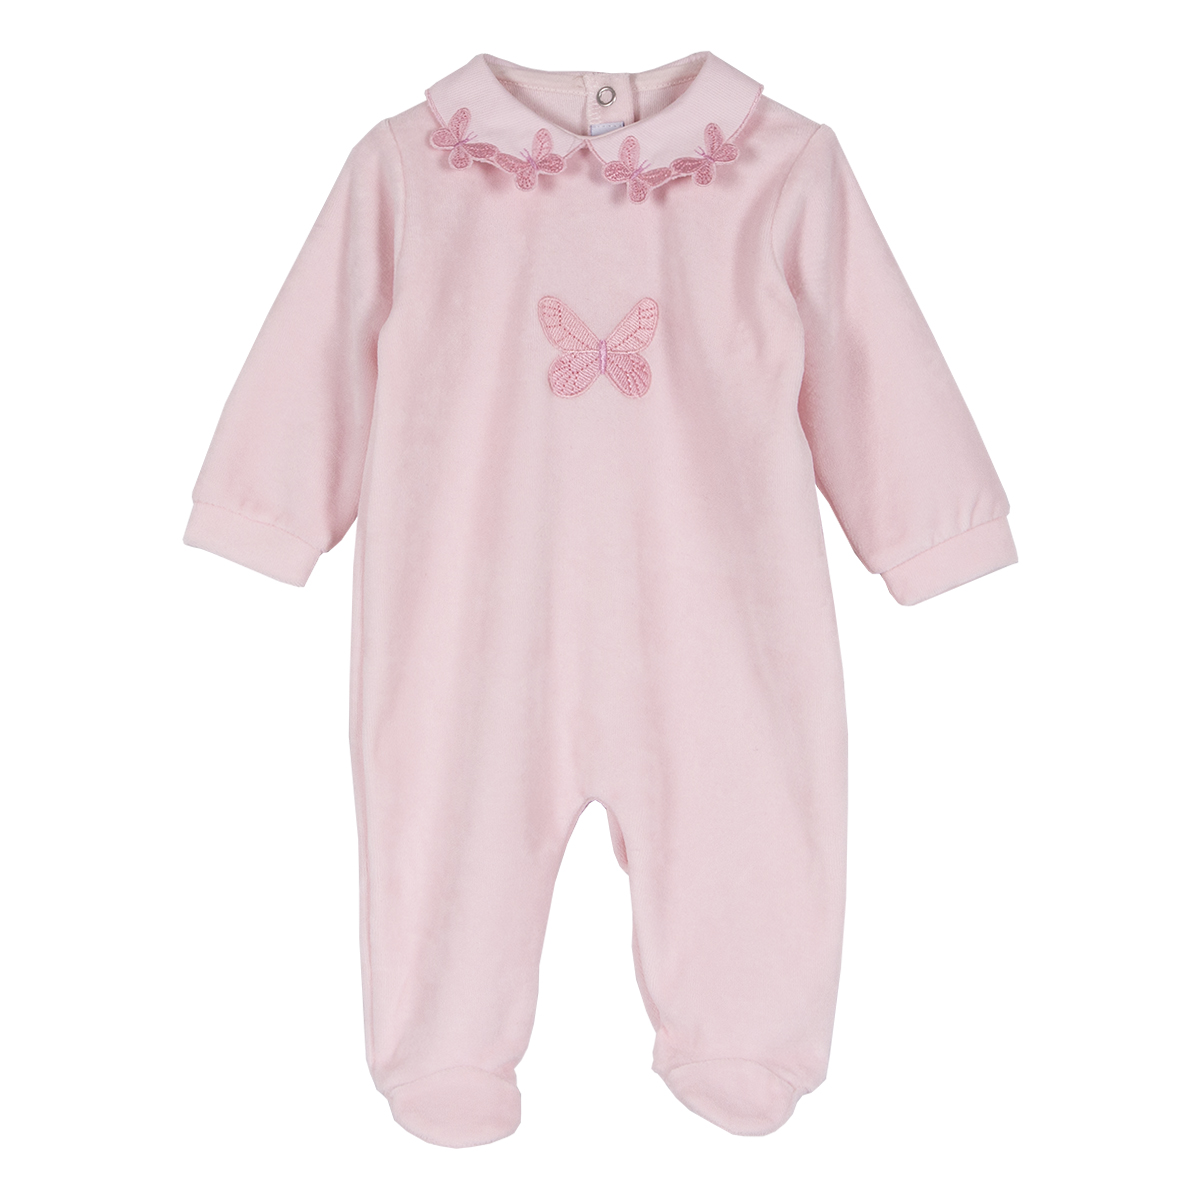 Siola Babies' Onesie With Embroidered Butterflies In Rosa